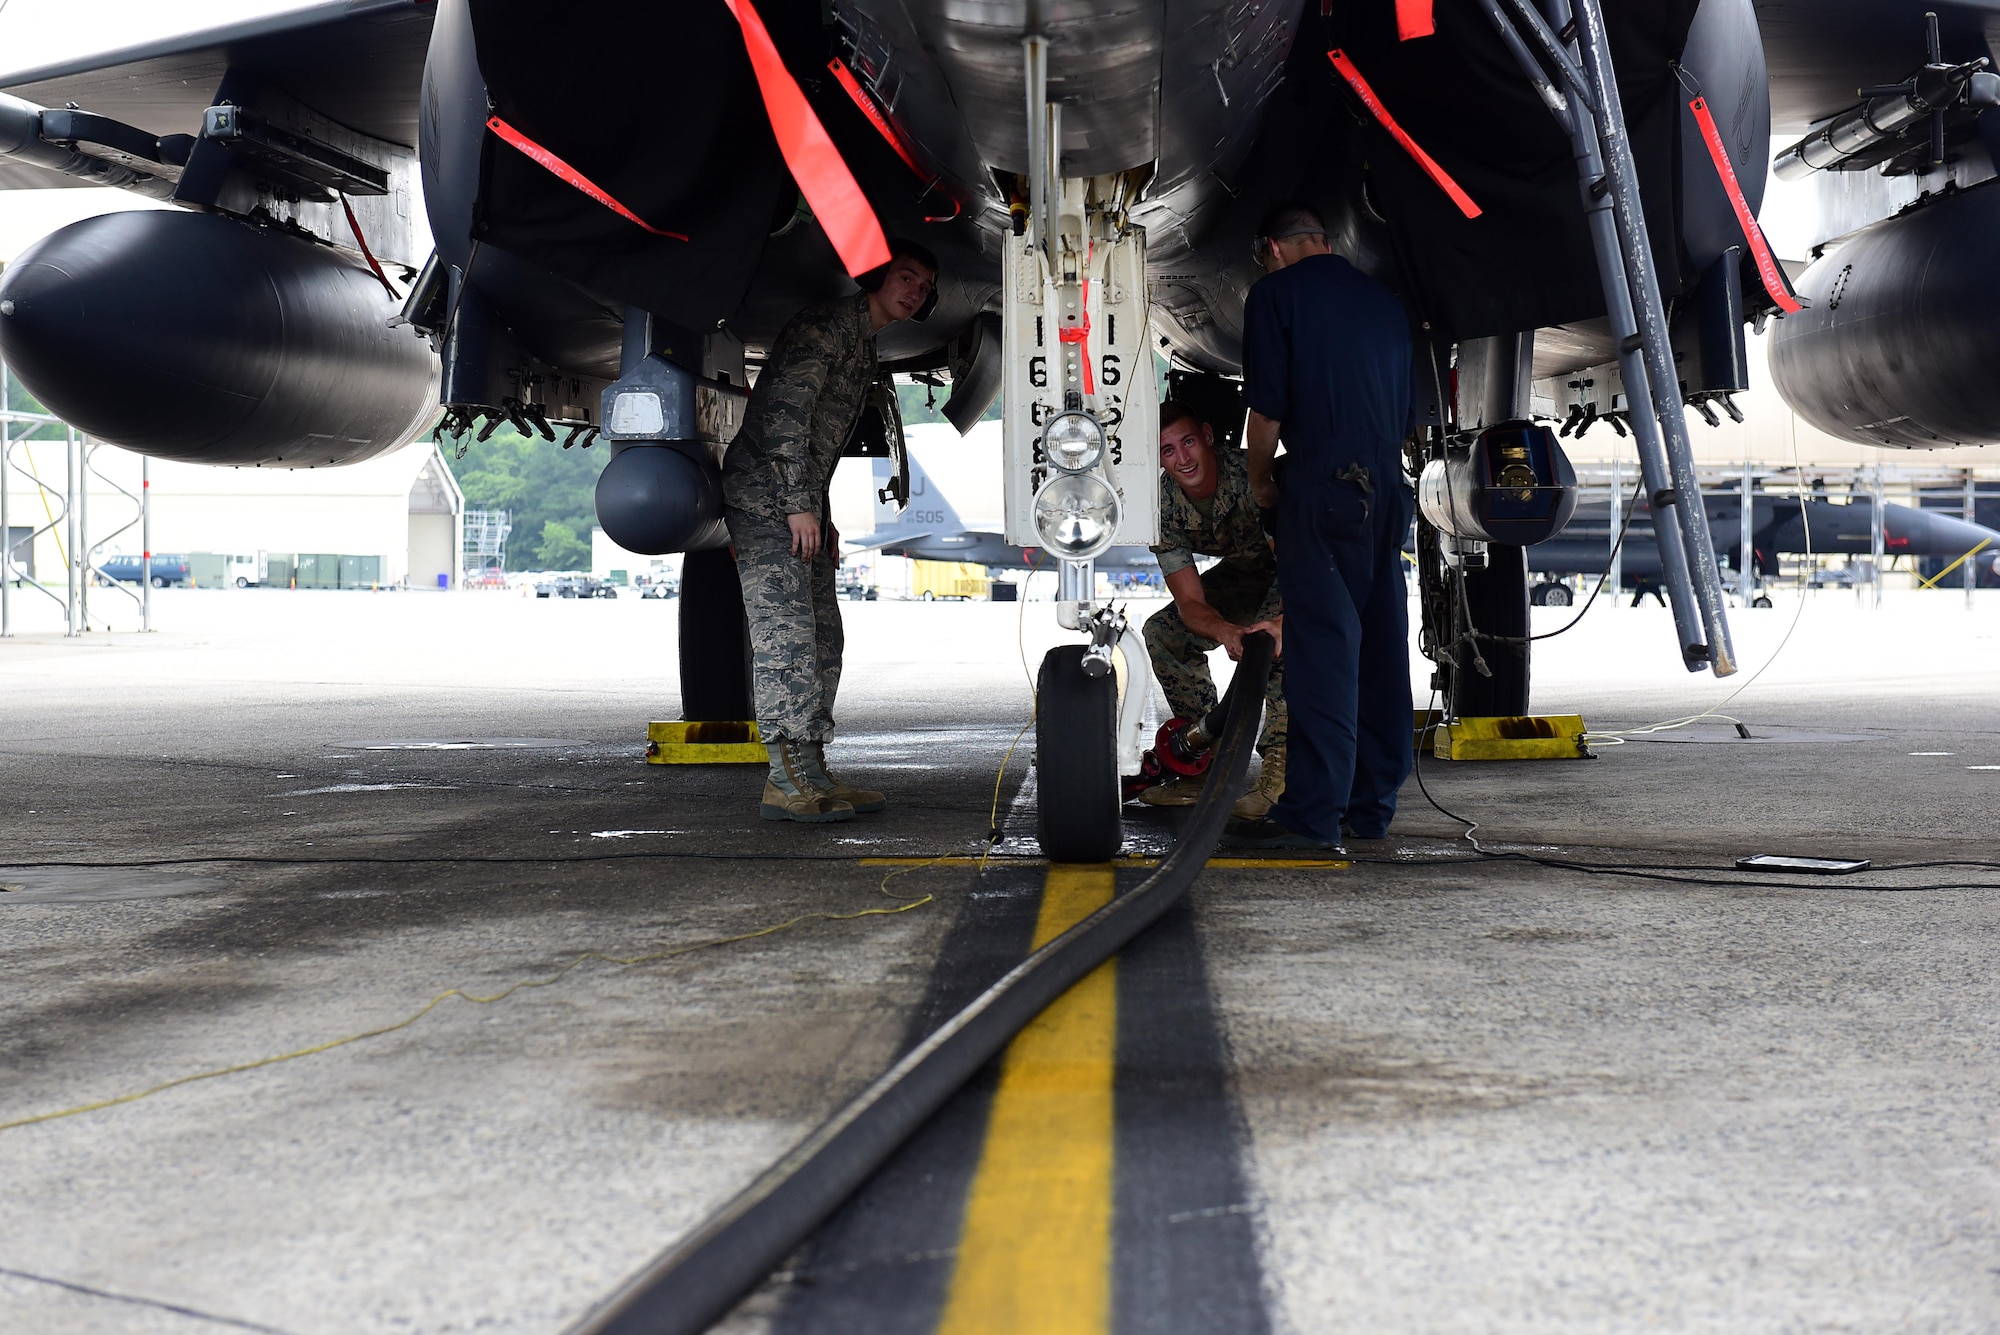 Airman Bryan Roy, 4th Logistics Readiness Squadron fuels specialist, and U.S. Marine Corps Cpl. Andrew Morris, Marine Wing Support Squadron 271 bulk fuel specialist, prepare to attach a fuel line to an F-15E Strike Eagle for refueling, June 22, 2017, at Seymour Johnson Air Force Base, North Carolina. The Marines received hands-on training with R-11 aircraft refueling vehicles before deploying to Morón Air Base, Spain. (U.S. Air Force photo by Airman 1st Class Kenneth Boyton)